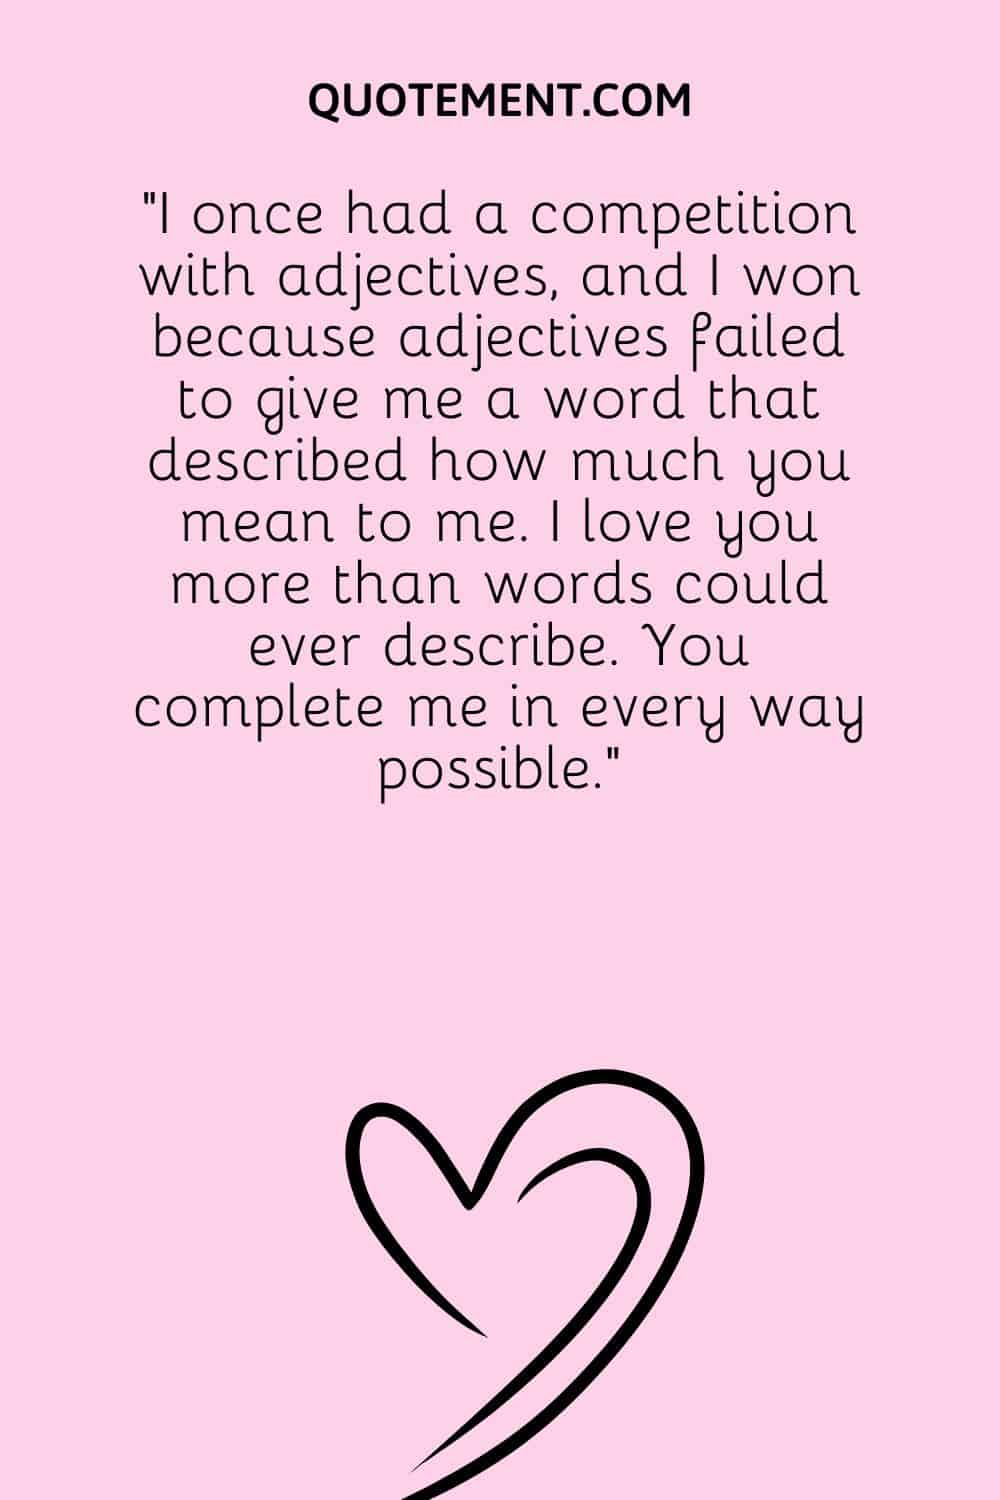 I once had a competition with adjectives